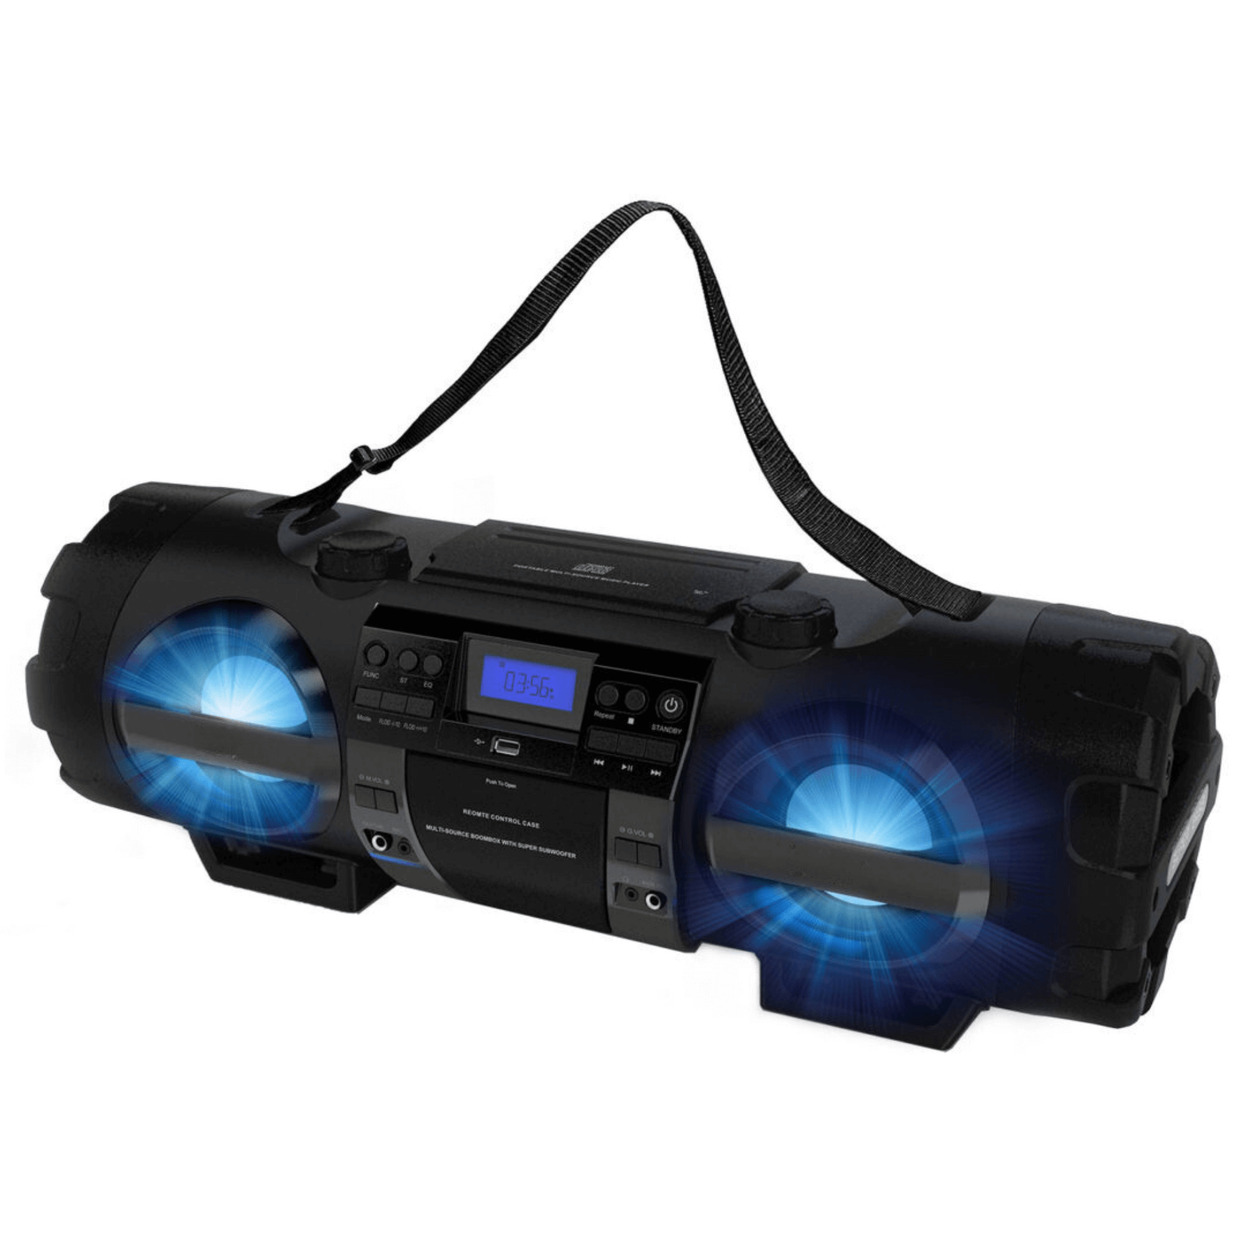 Emerson Dual Subwoofer Bluetooth Boombox